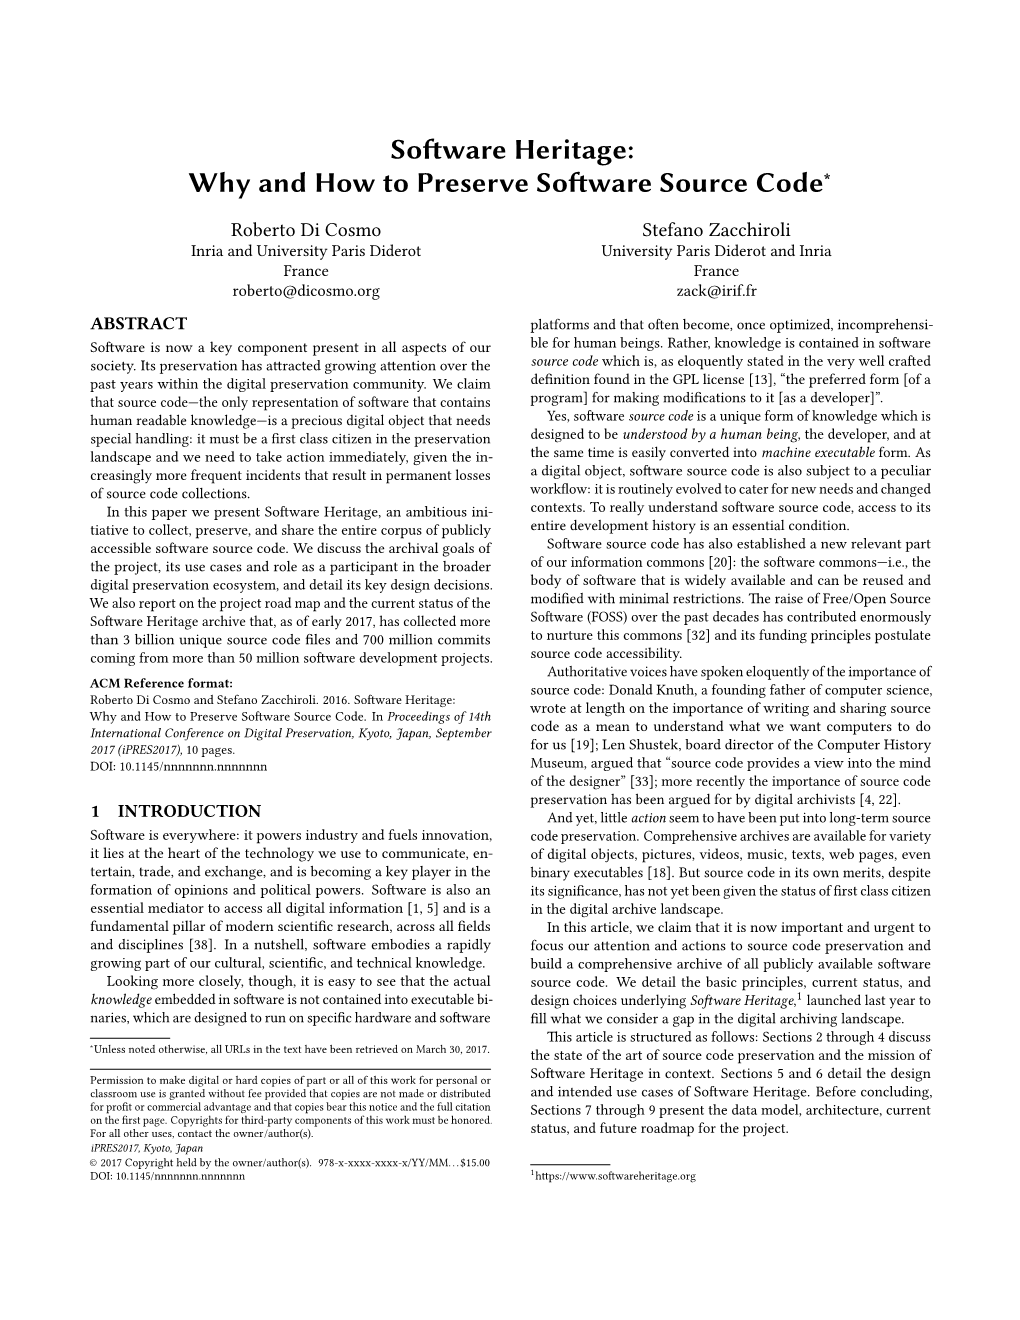 Why and How to Preserve Software Source Code